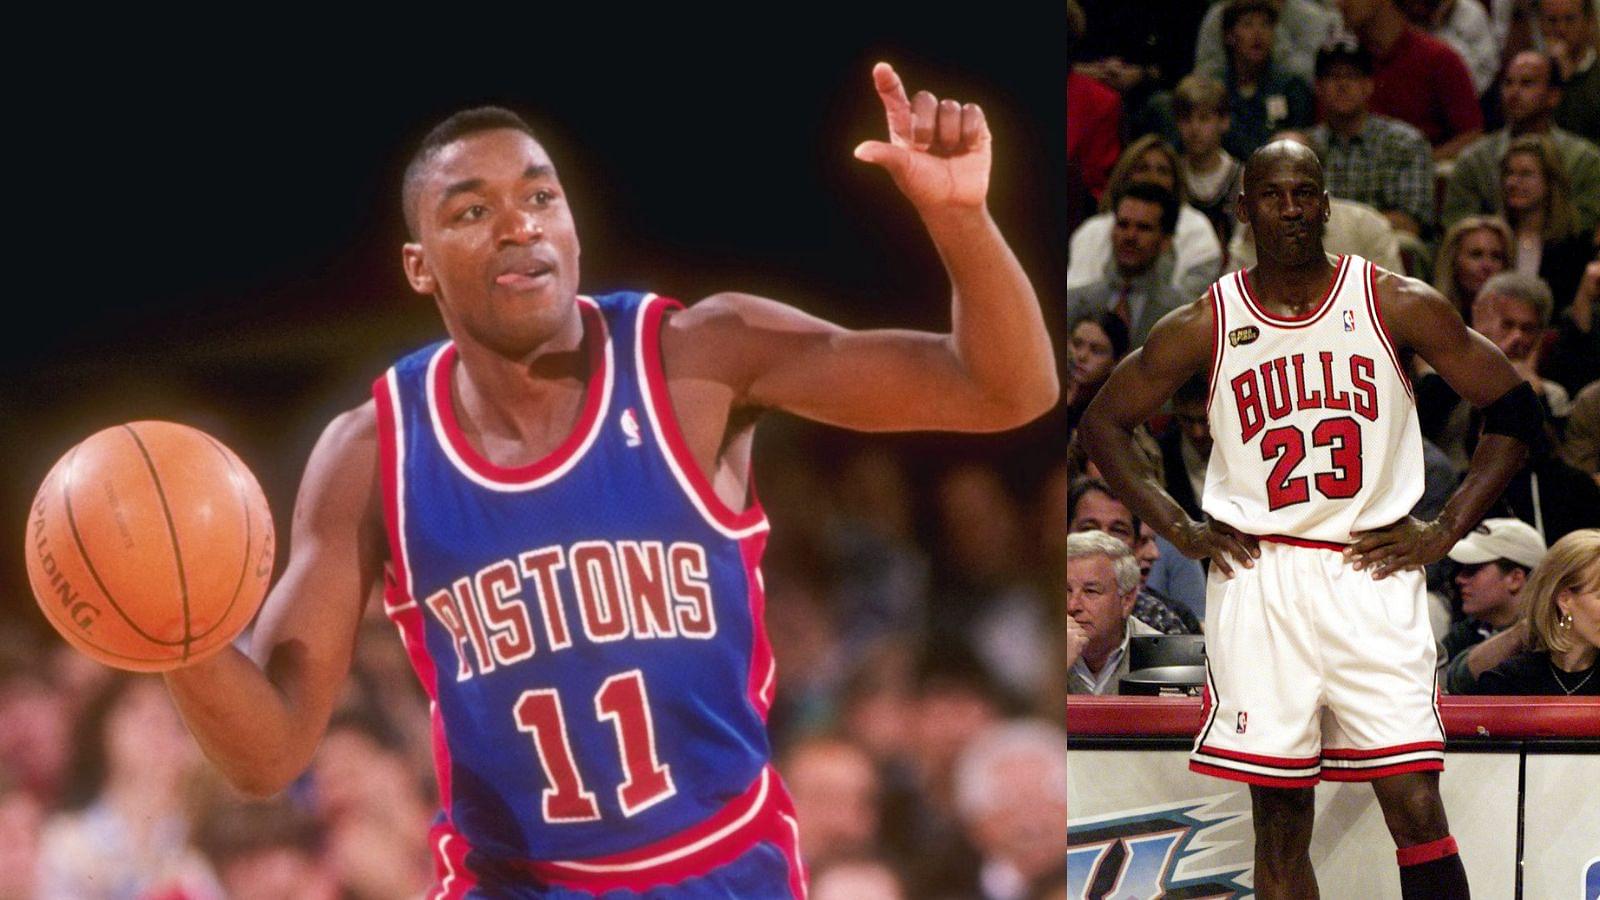 Michael Jordan, Who Didn’t Let 6ft 1" Isiah Thomas Into Dream Team, Lost 7 More Career Games to Zeke Than he Won